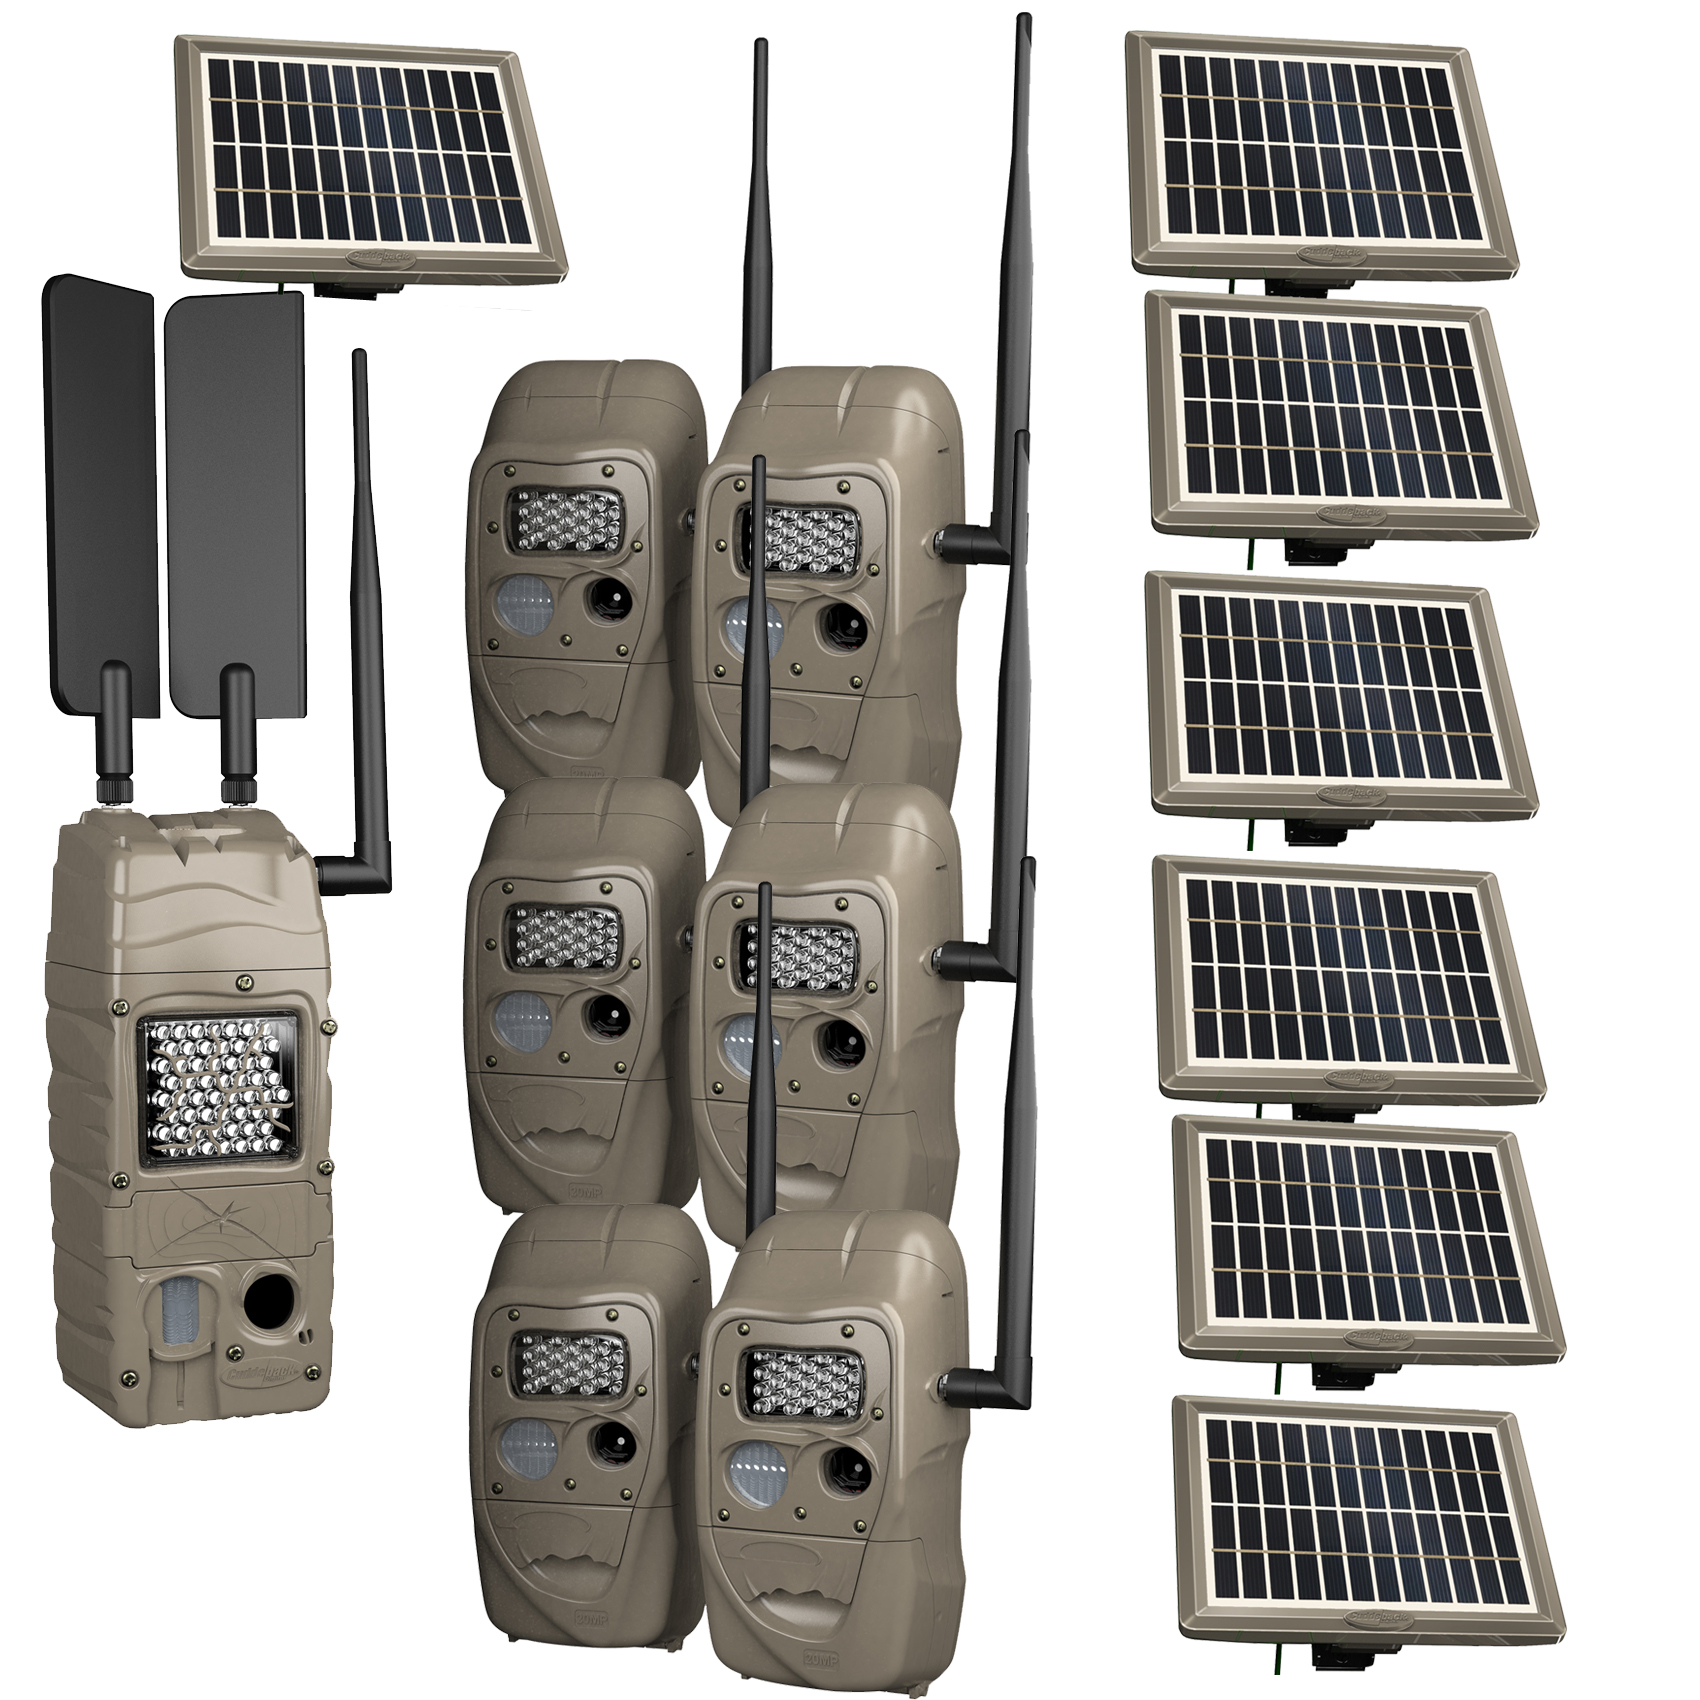 Cuddeback CuddeLink Cell Starter Kit 6+1 AT&T Power House IR Home Camera G- 5147 with 6 J IR Flash with 7 Solar Kits 09036* - Farmstead Outdoors